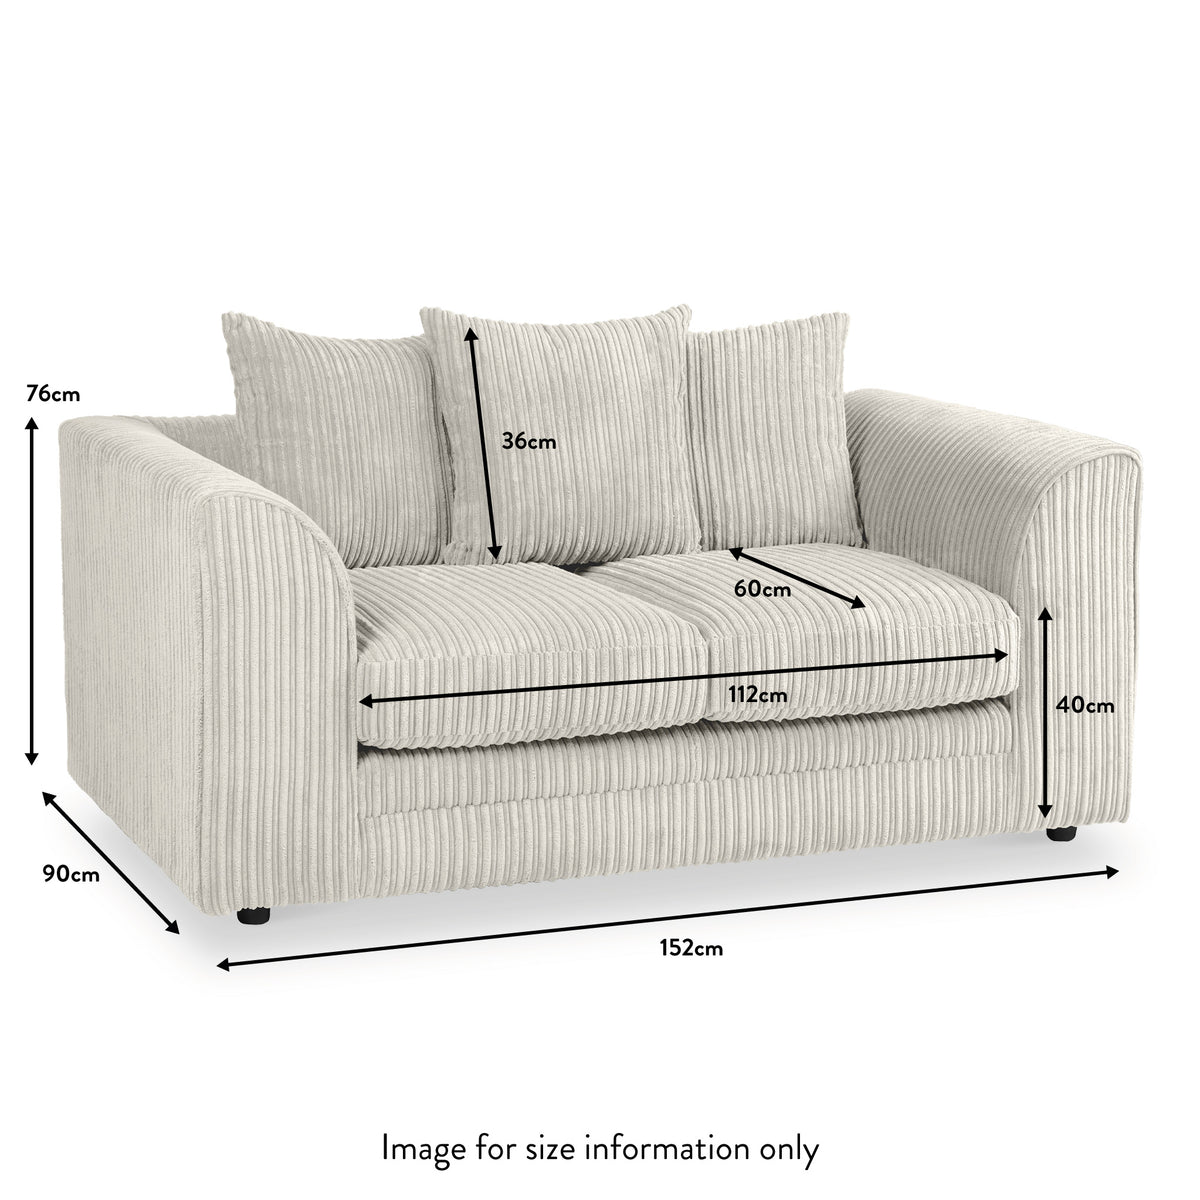 Bletchley Cream Jumbo Cord 2 Seater Sofa dimensions